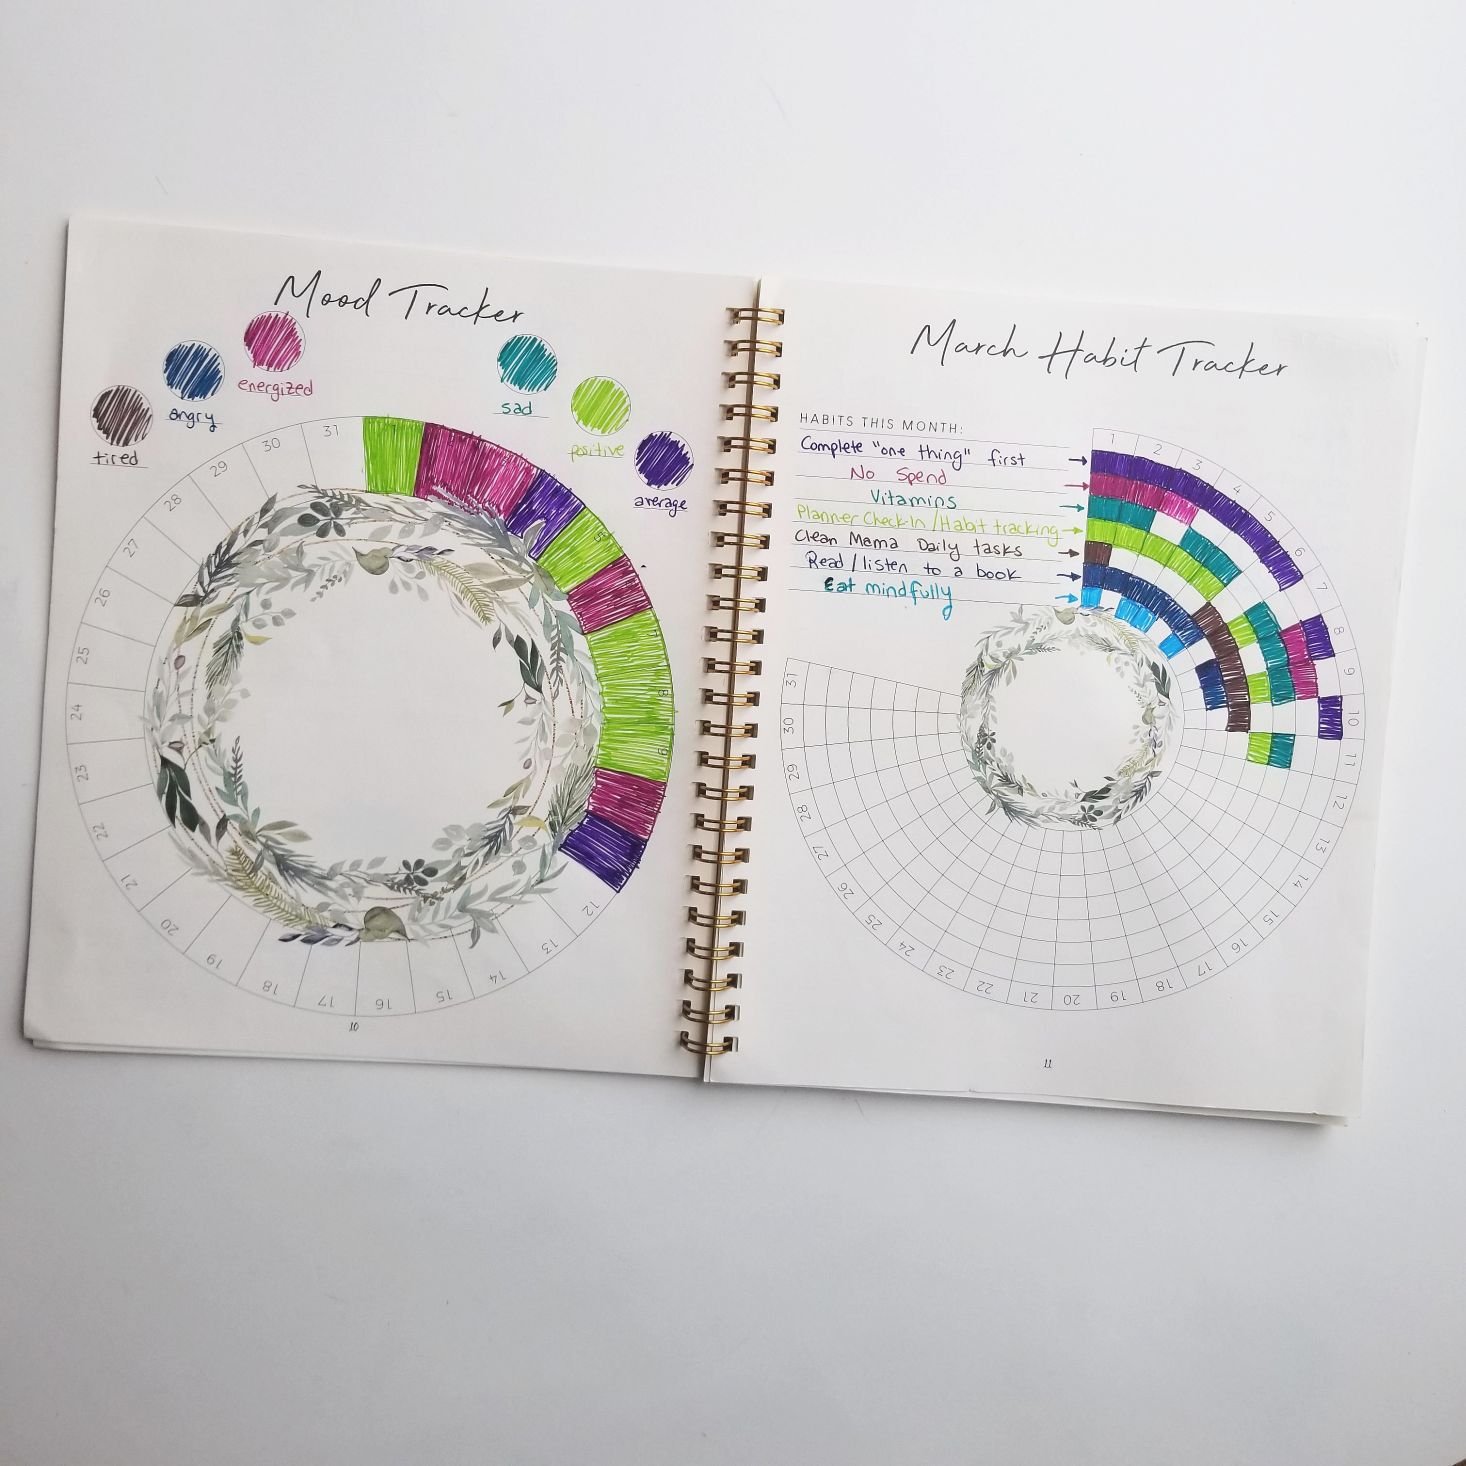 Silk + Sonder Planner March 2020 trackers exemplified